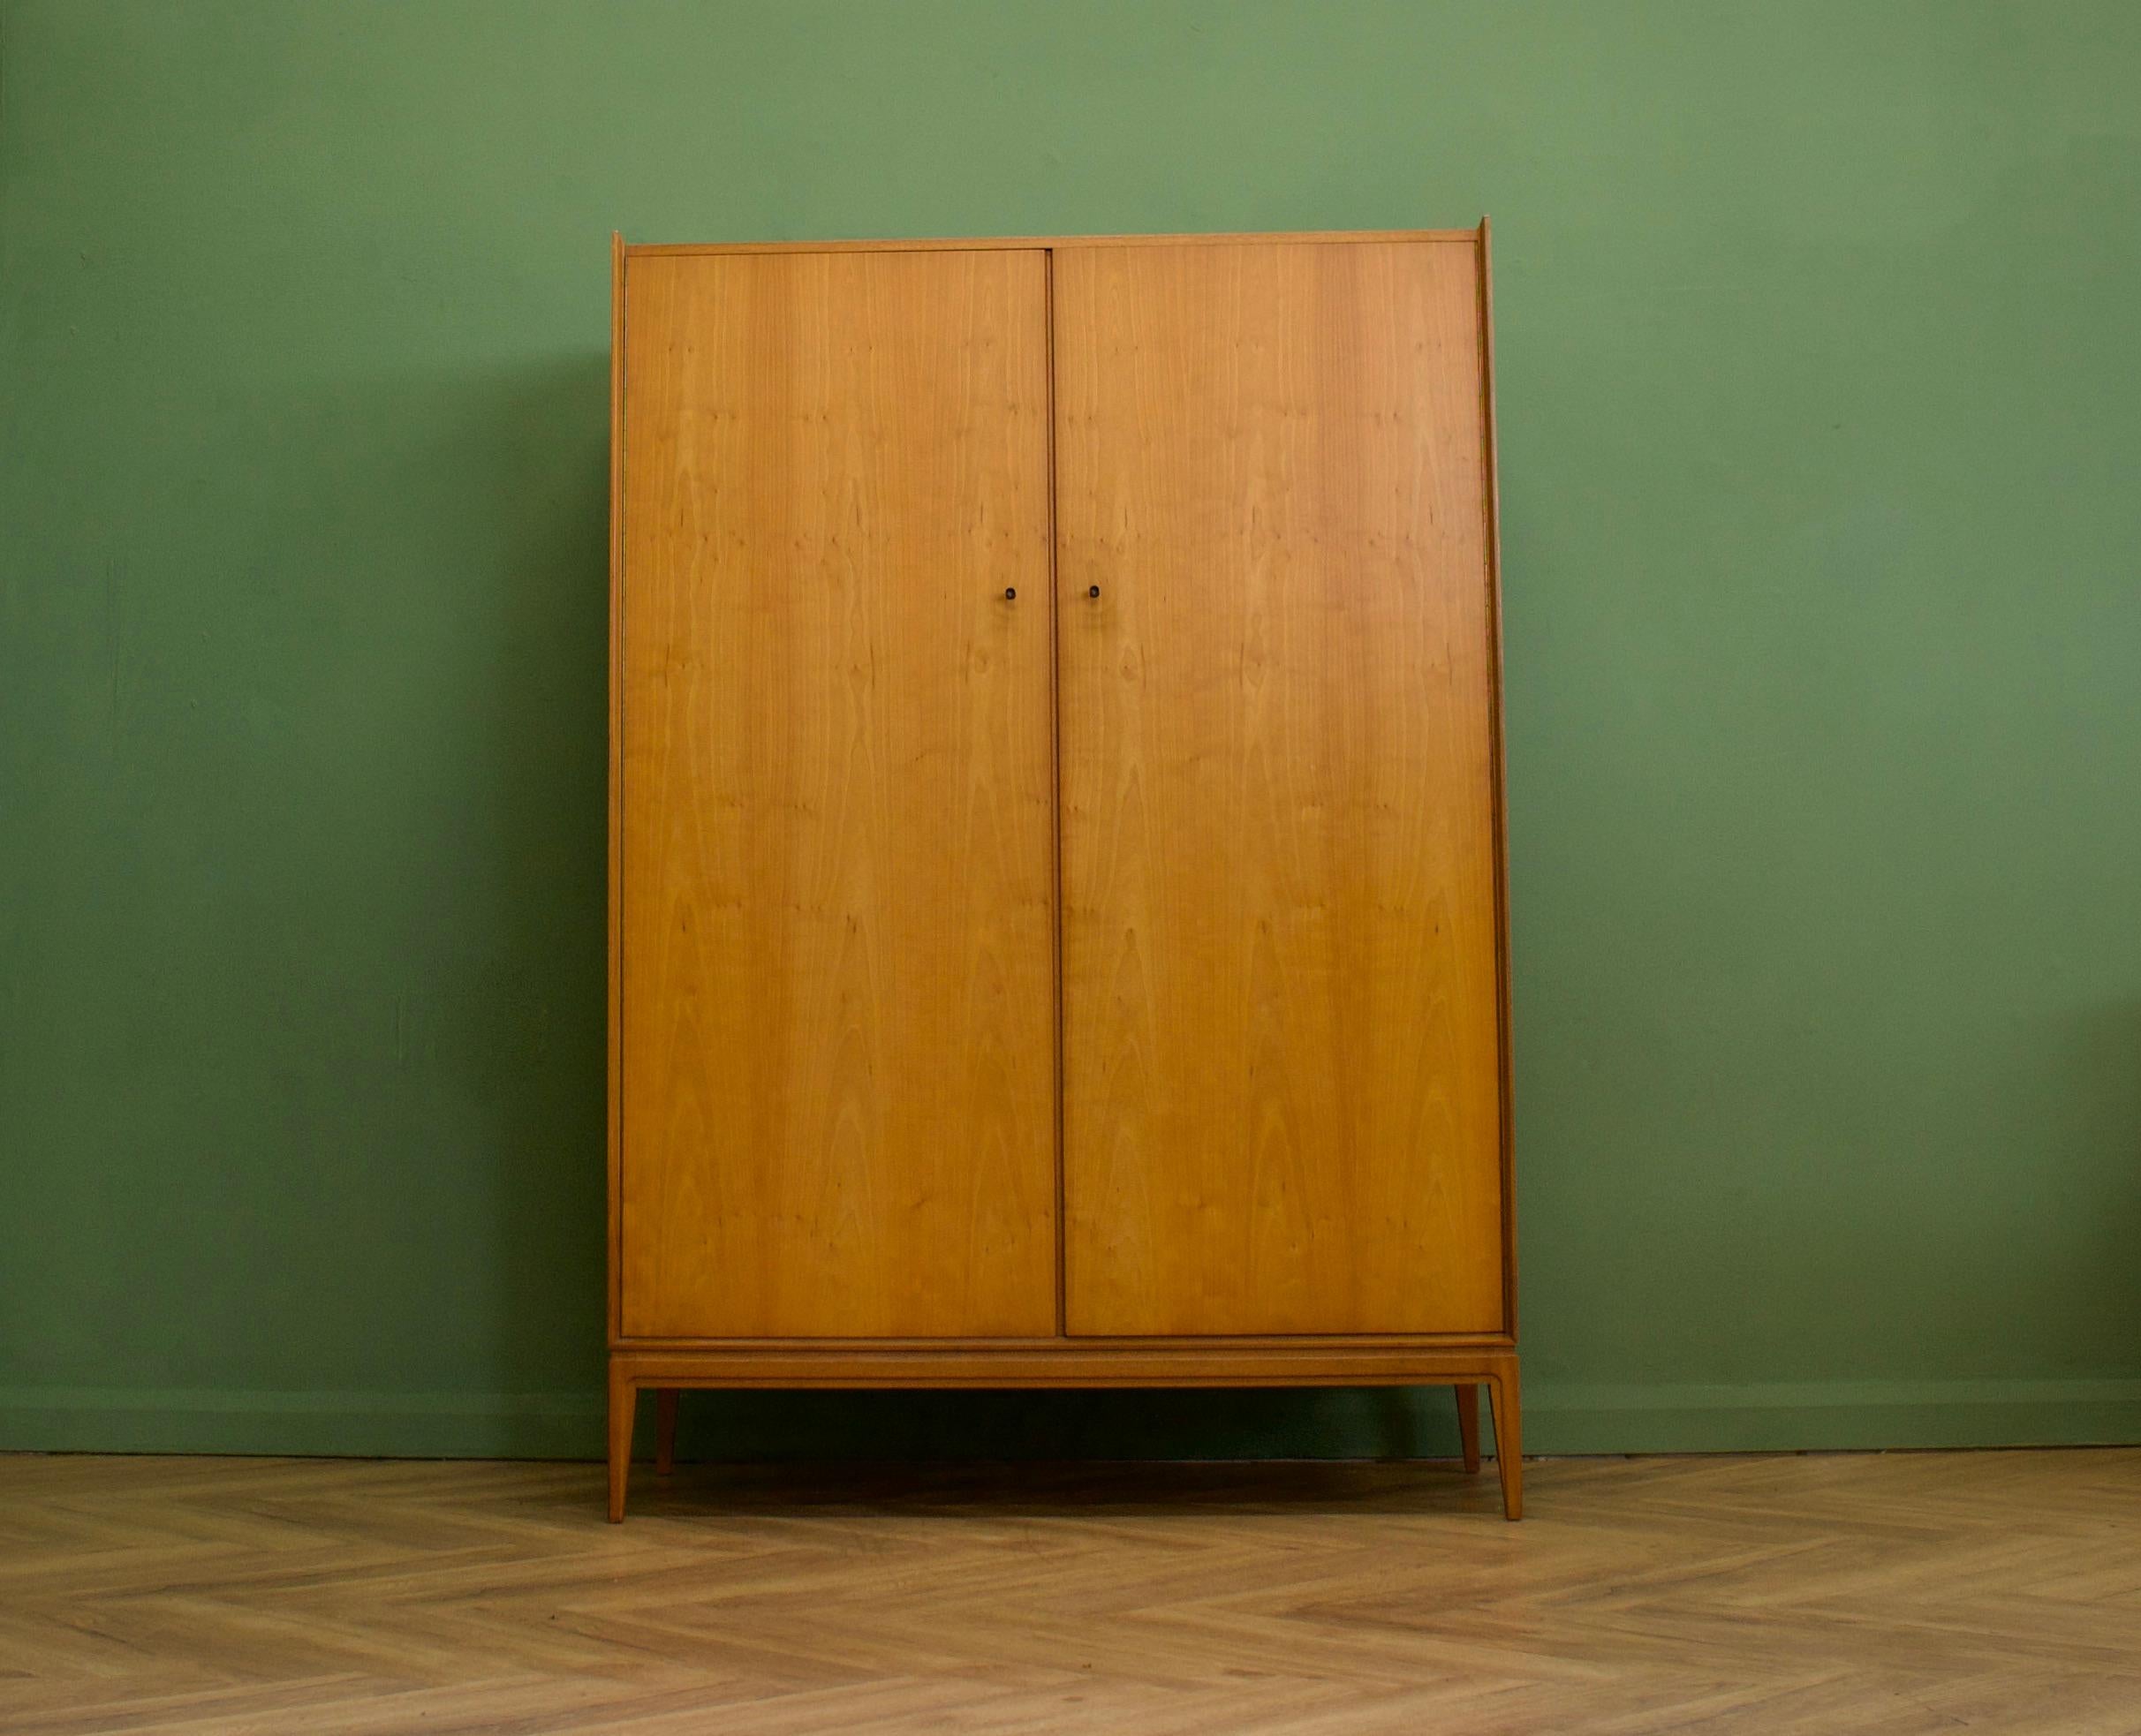 A freestanding double door teak wardrobe from McIntosh - in the Danish modern style
Made during the 1960s

Fitted out with a clothes rail and fixed shelving for ample storage in such a compact piece
The style of this wardrobe is quite minimalist -